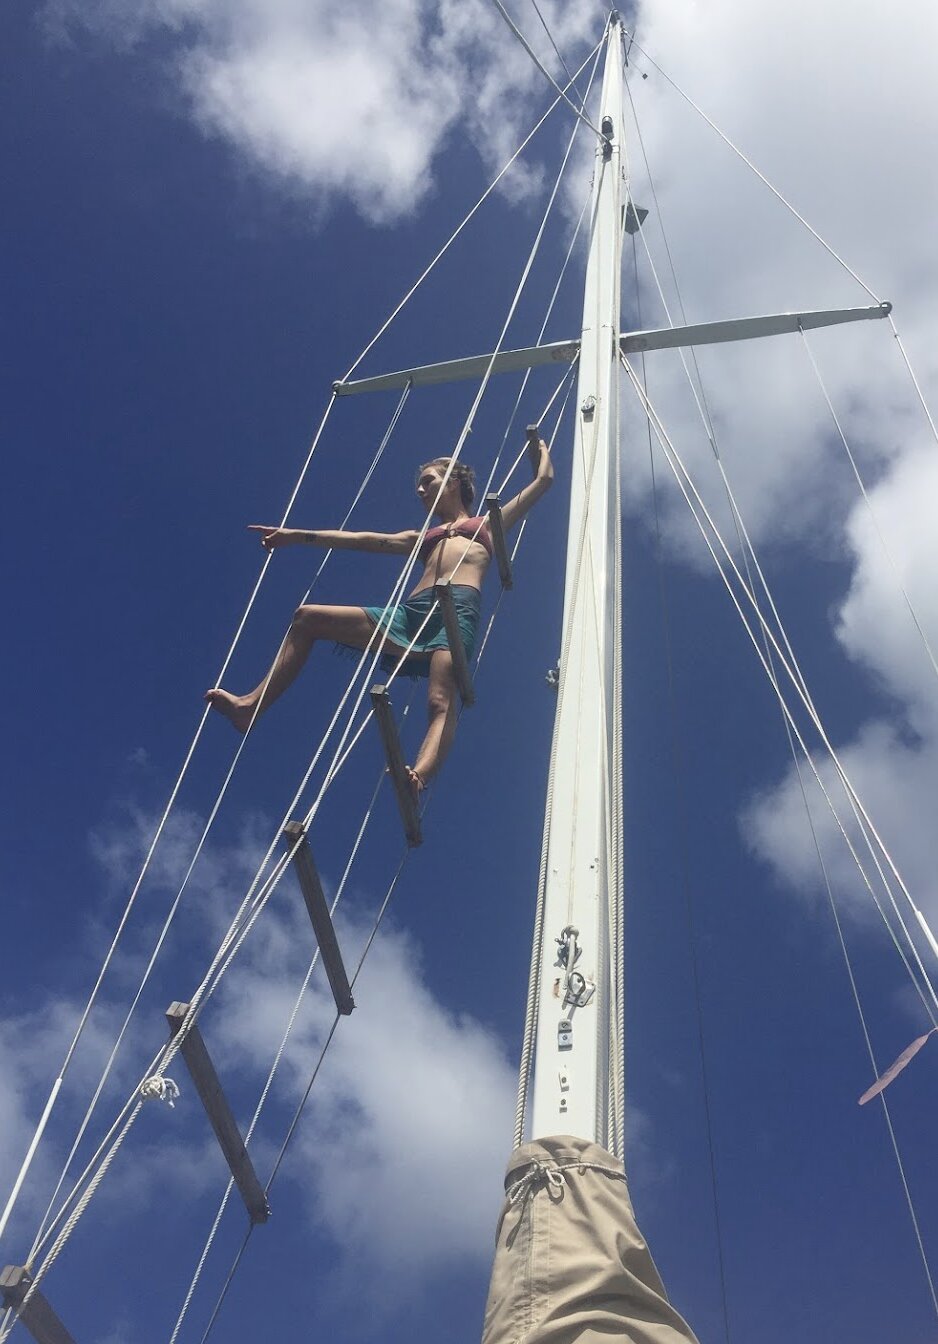 A girl is in the rigging of a sailboat in French Polynesia